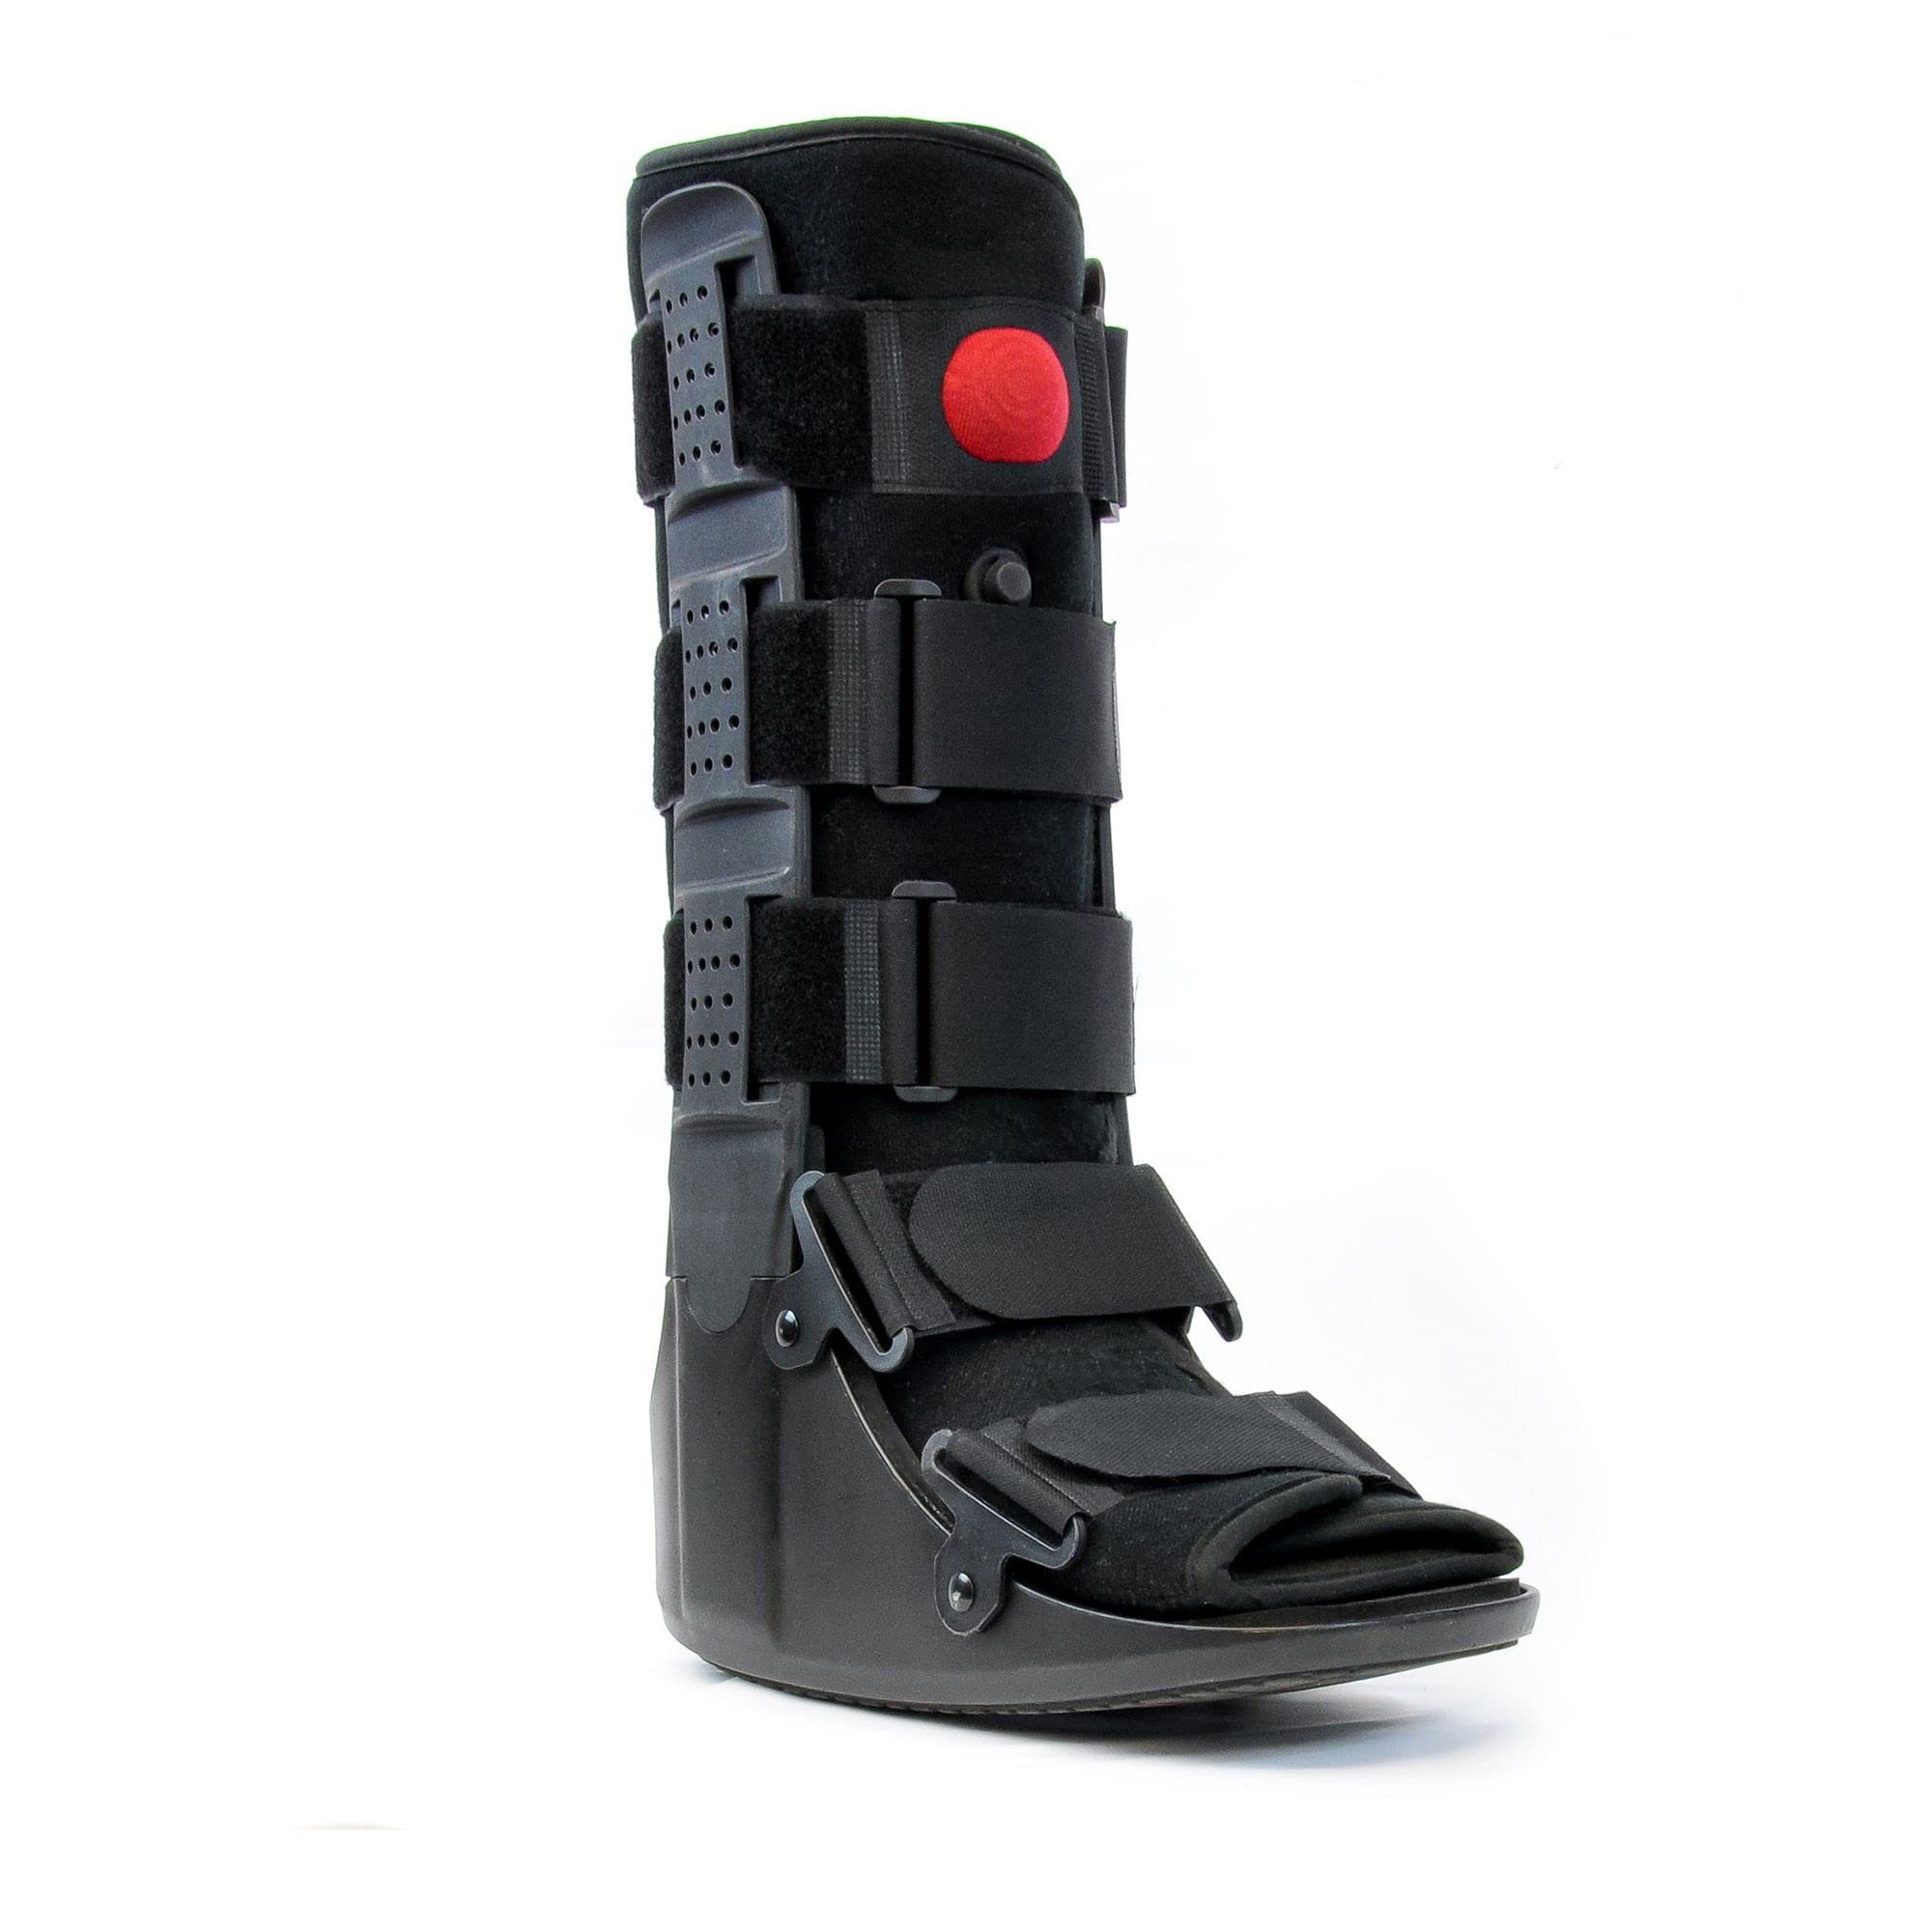 Wide Air CAM Walker Fracture Orthopedic Boot Tall Extended Width 2E- Complete Medical Recovery, Protection, Healing and Boot- Toe Foot or Ankle Inj...